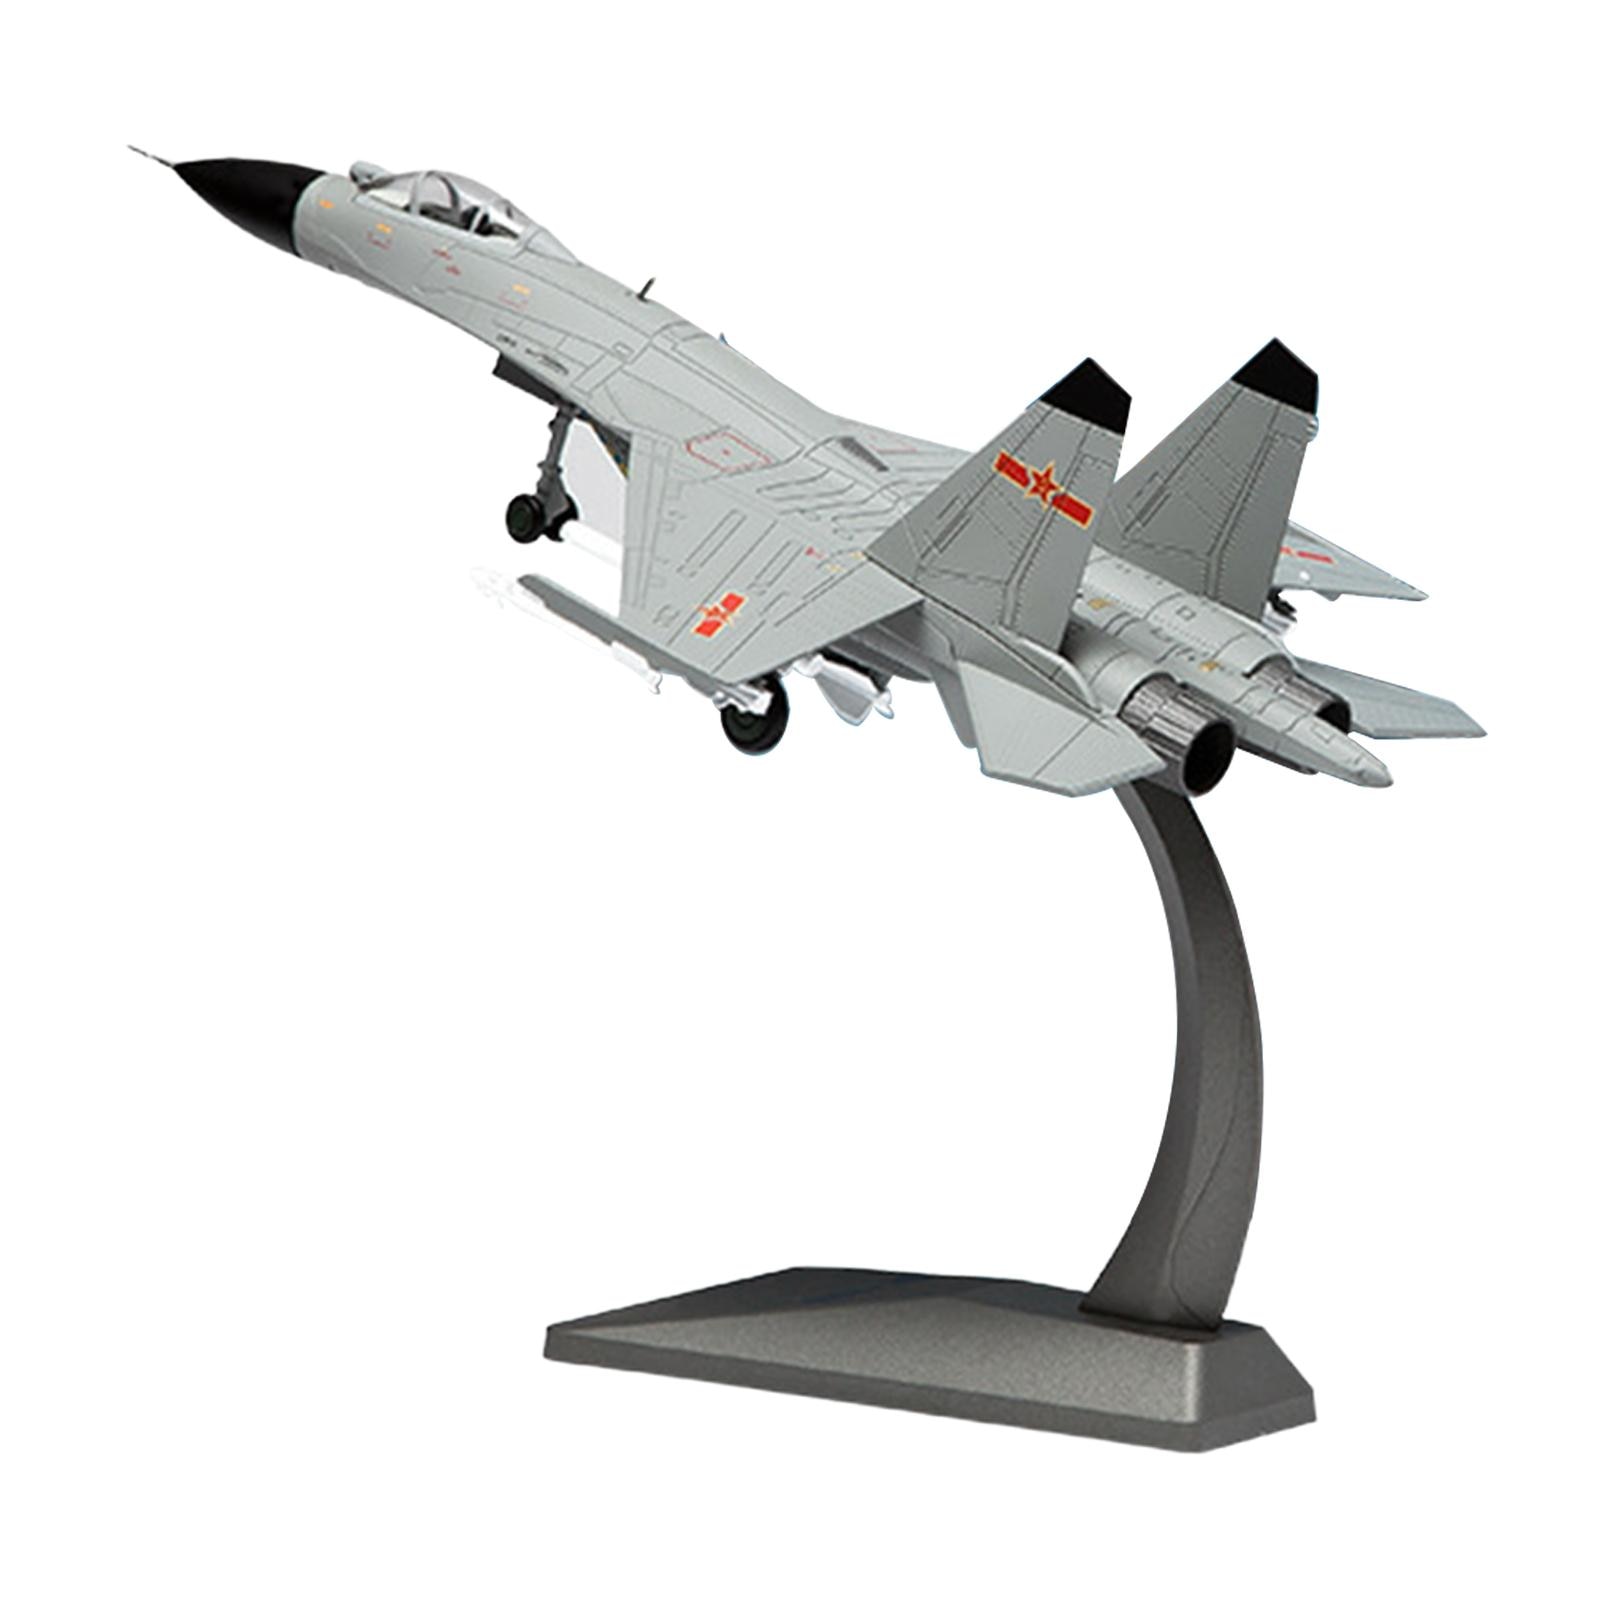 1/72 Aircraft Plane Model Simulation Collection Ornament with Display Stand Tabletop Decor Diecast Model for Cafe Countertop Bar